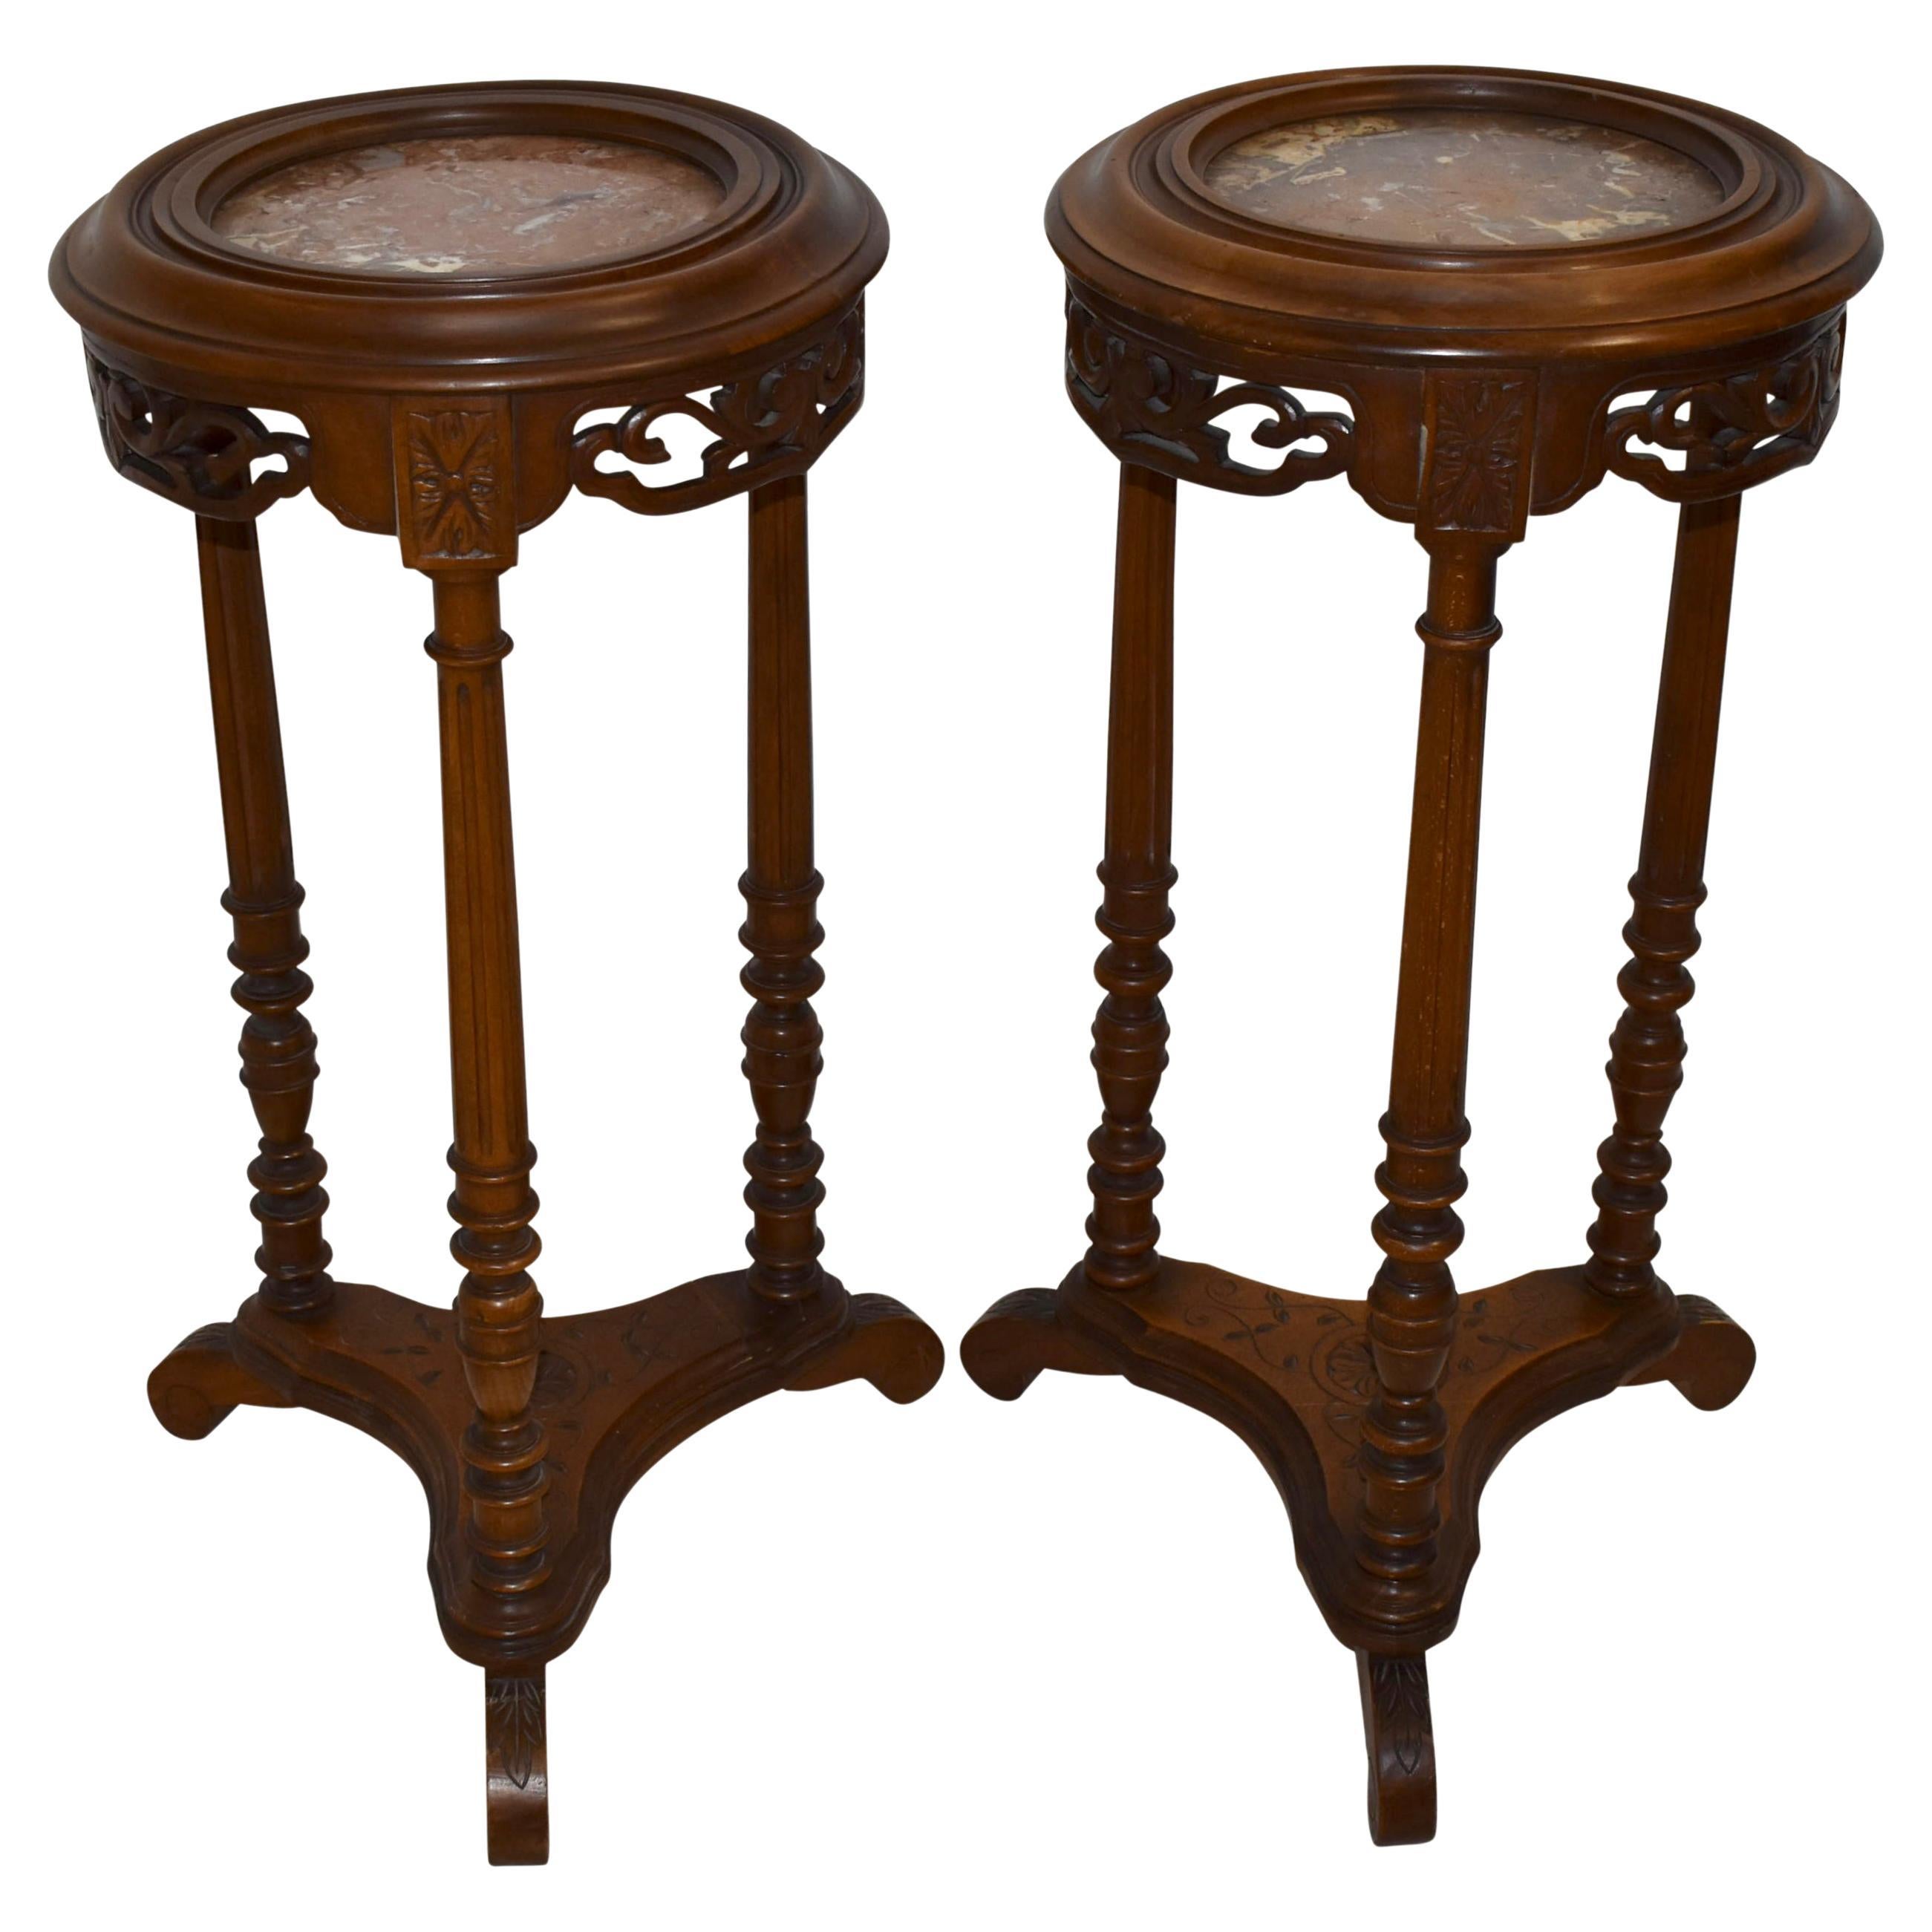 French Mahogany Side Tables/Candle Stands with Marble Tops, Set of 2, circa 1900 For Sale